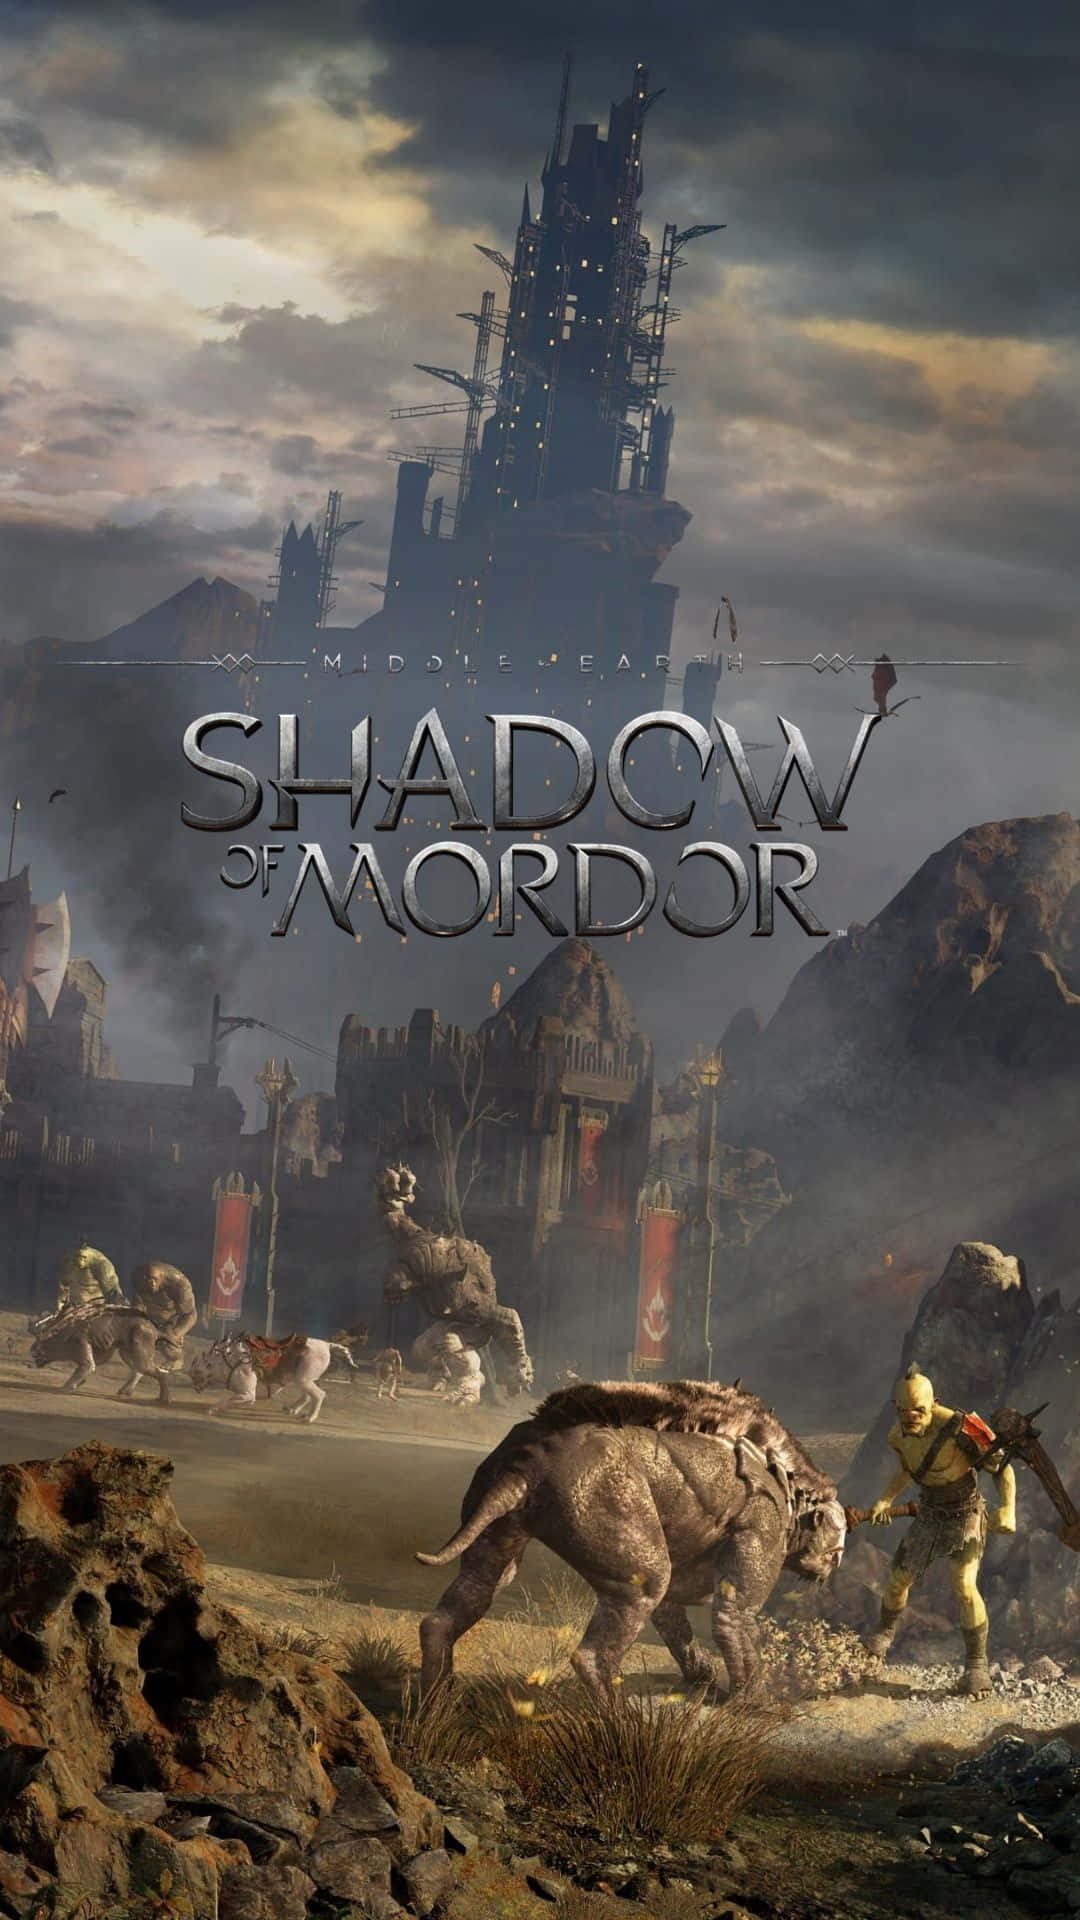 Immerse yourself in the powerful world of Android Shadow of Mordor